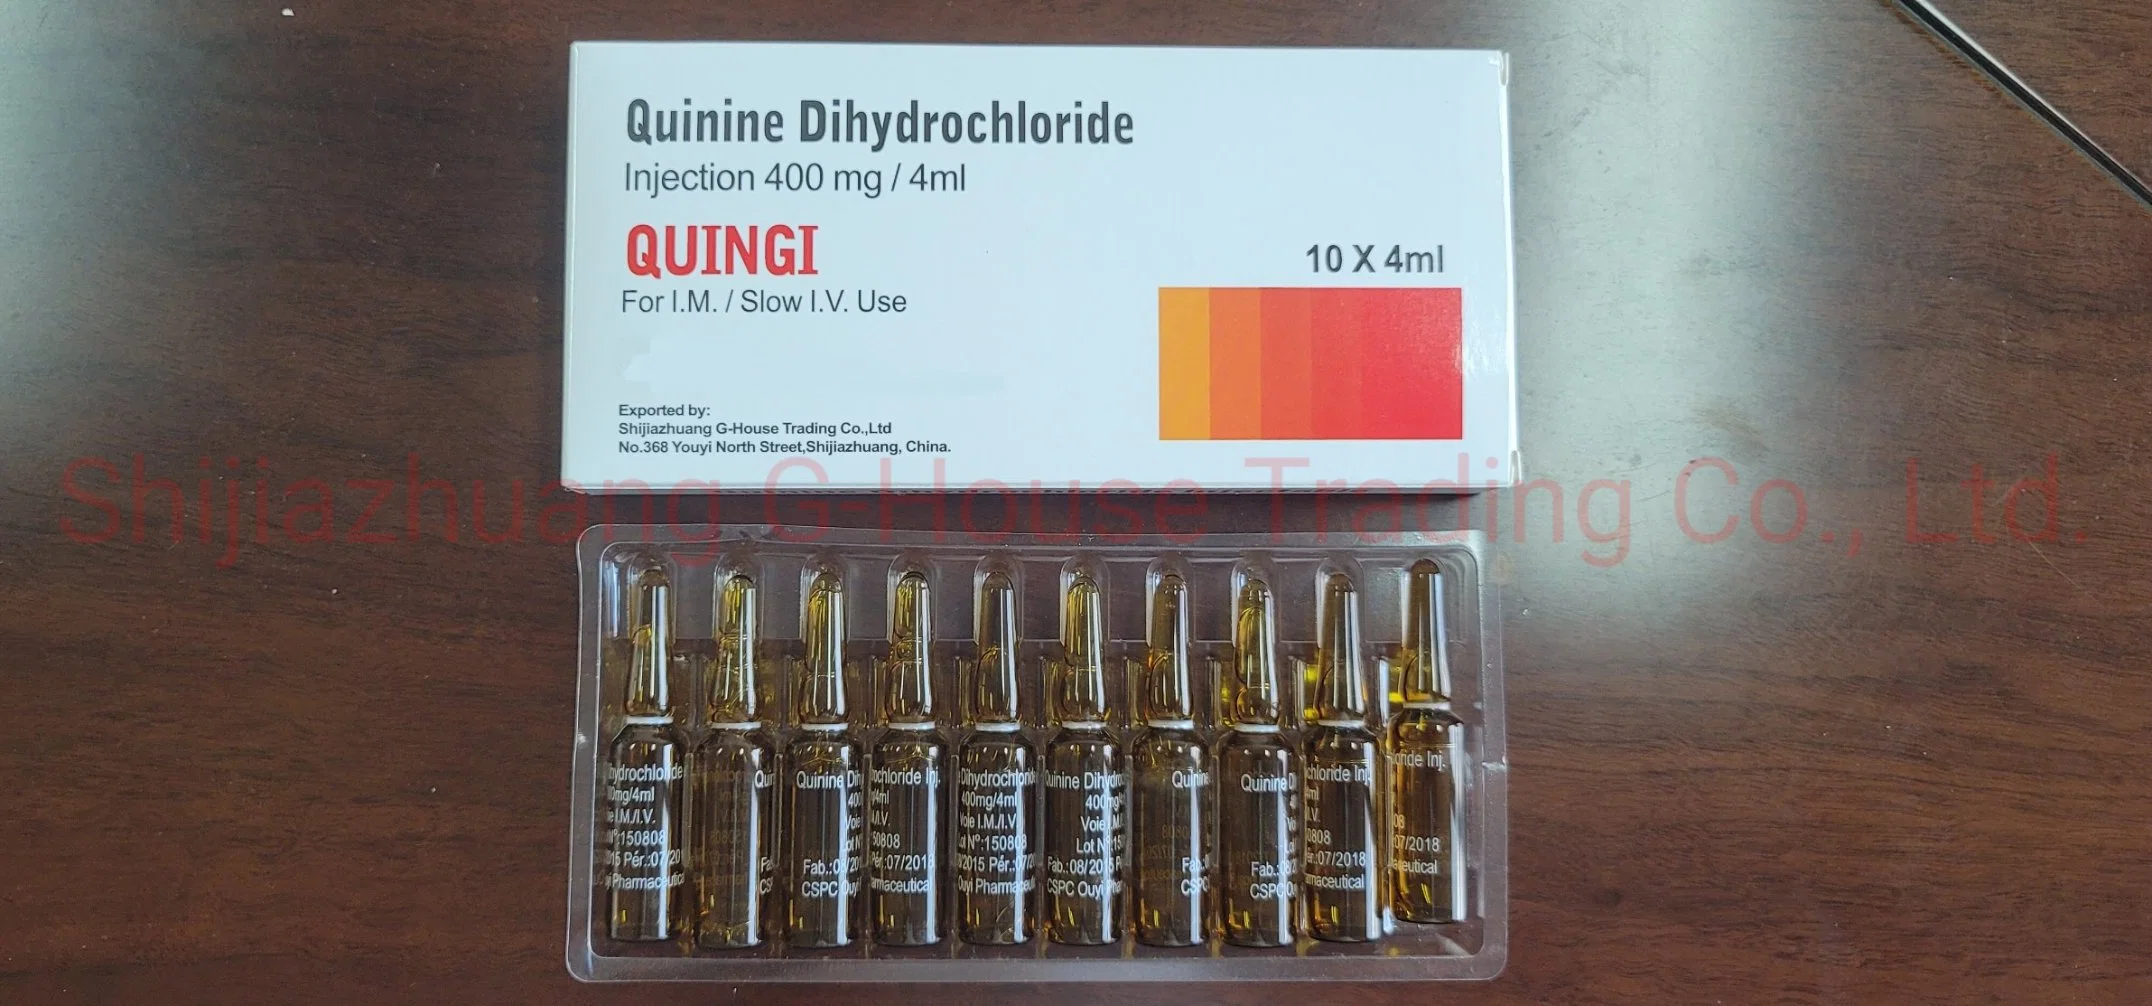 Quinine Dihydrochloride Injection 400mg/4ml Pharmaceutical